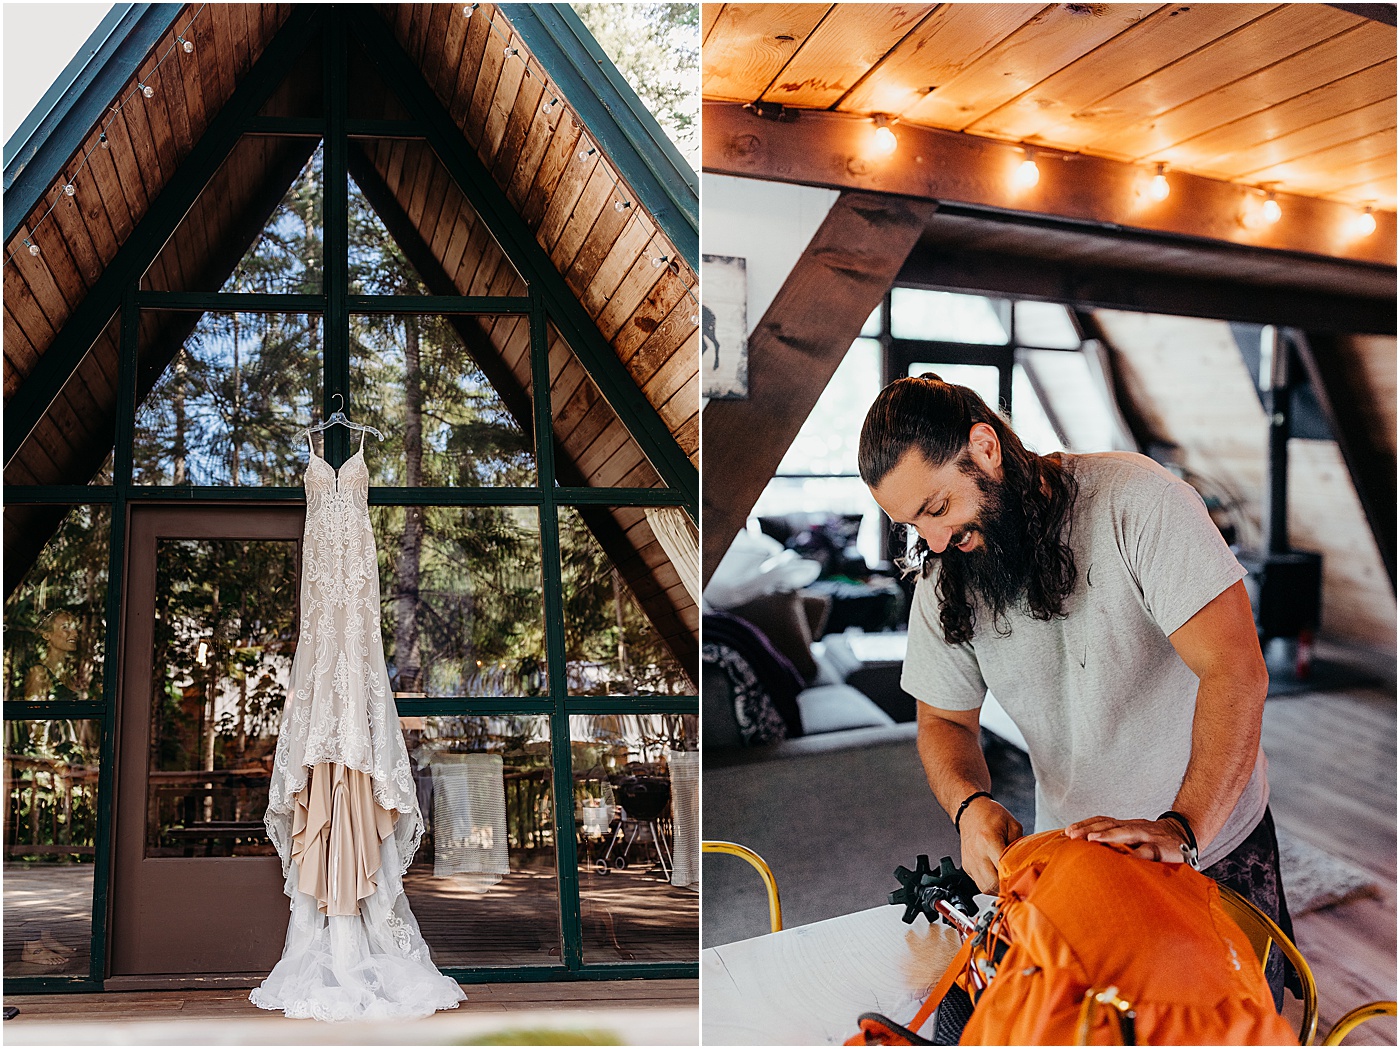 Dress hanging and groom getting ready for intimate elopement | Photo by Megan Montalvo Photography